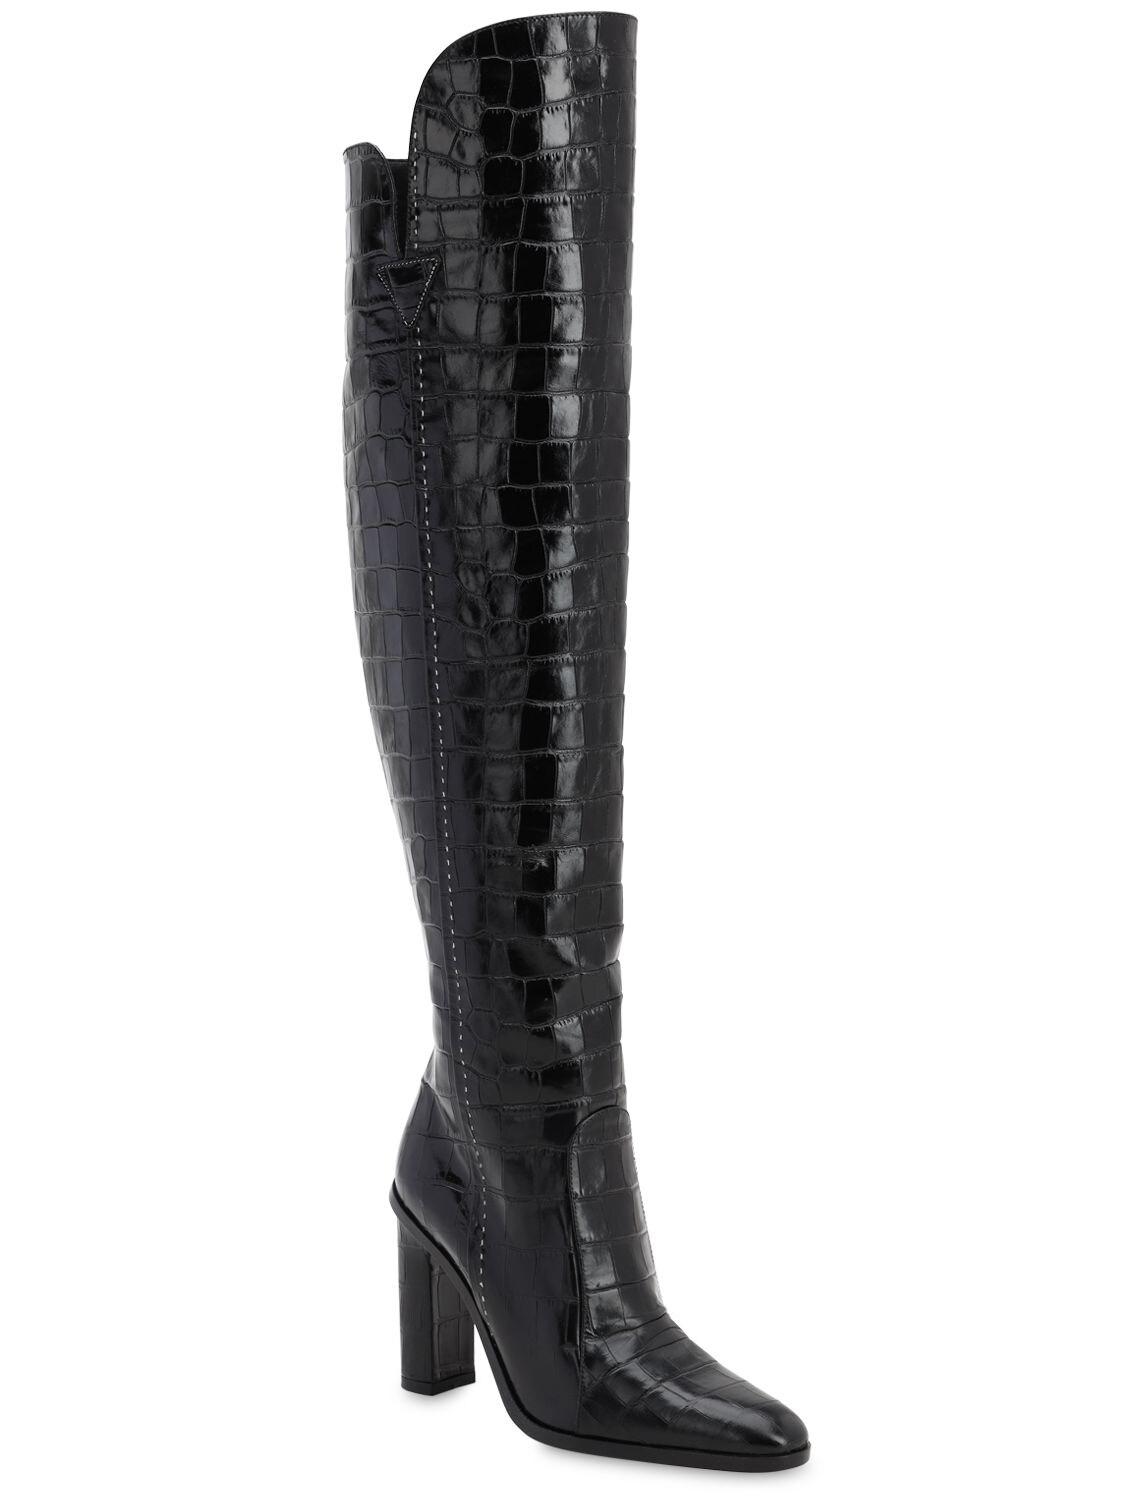 Max Mara 100mm Beboot Croc Embossed Leather Boots in Black - Lyst